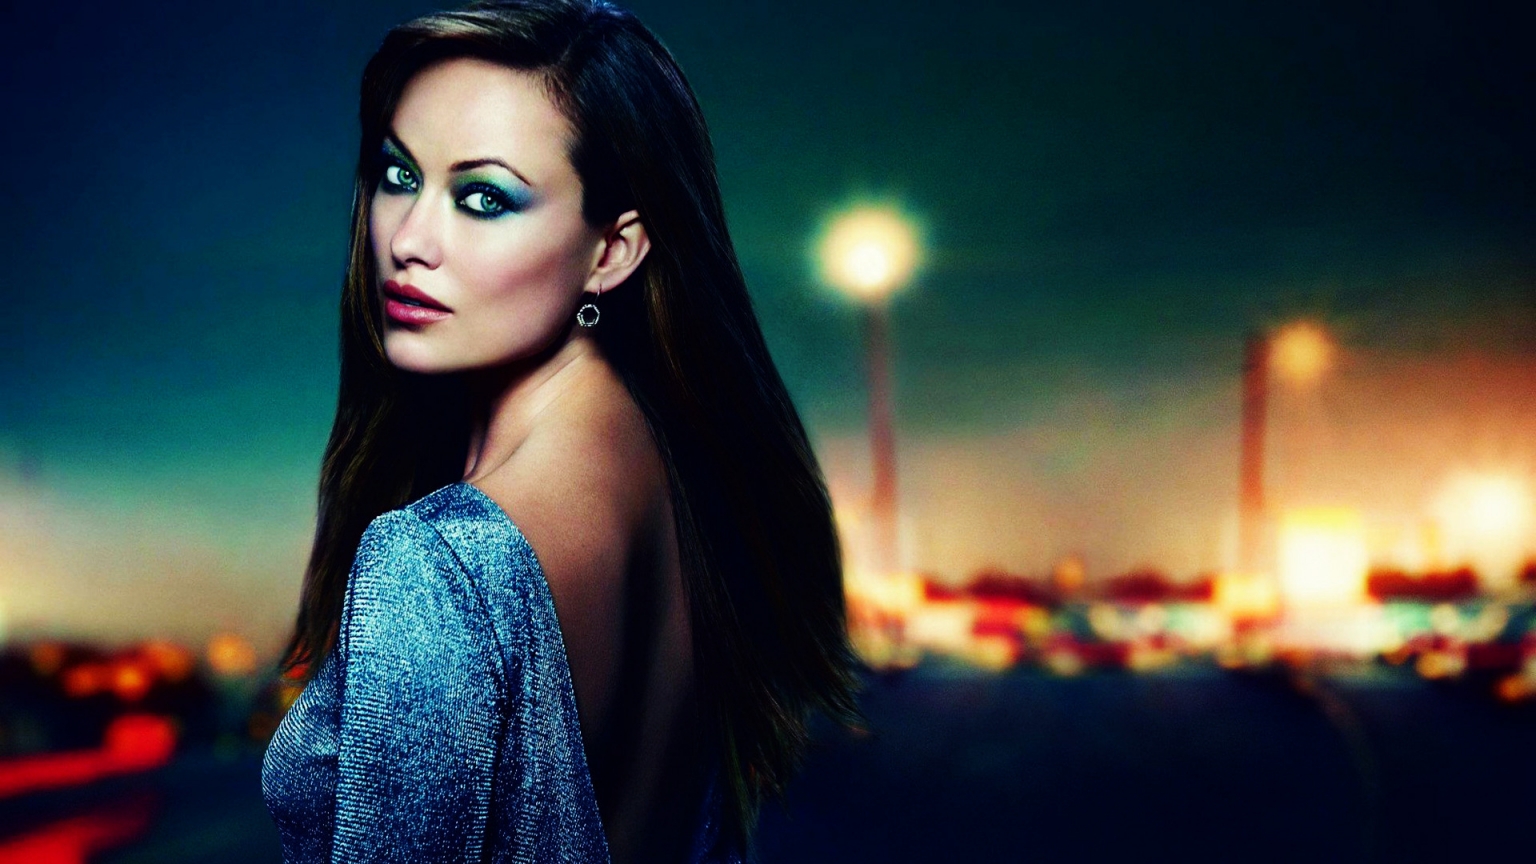 Olivia Wilde Profile Look for 1536 x 864 HDTV resolution